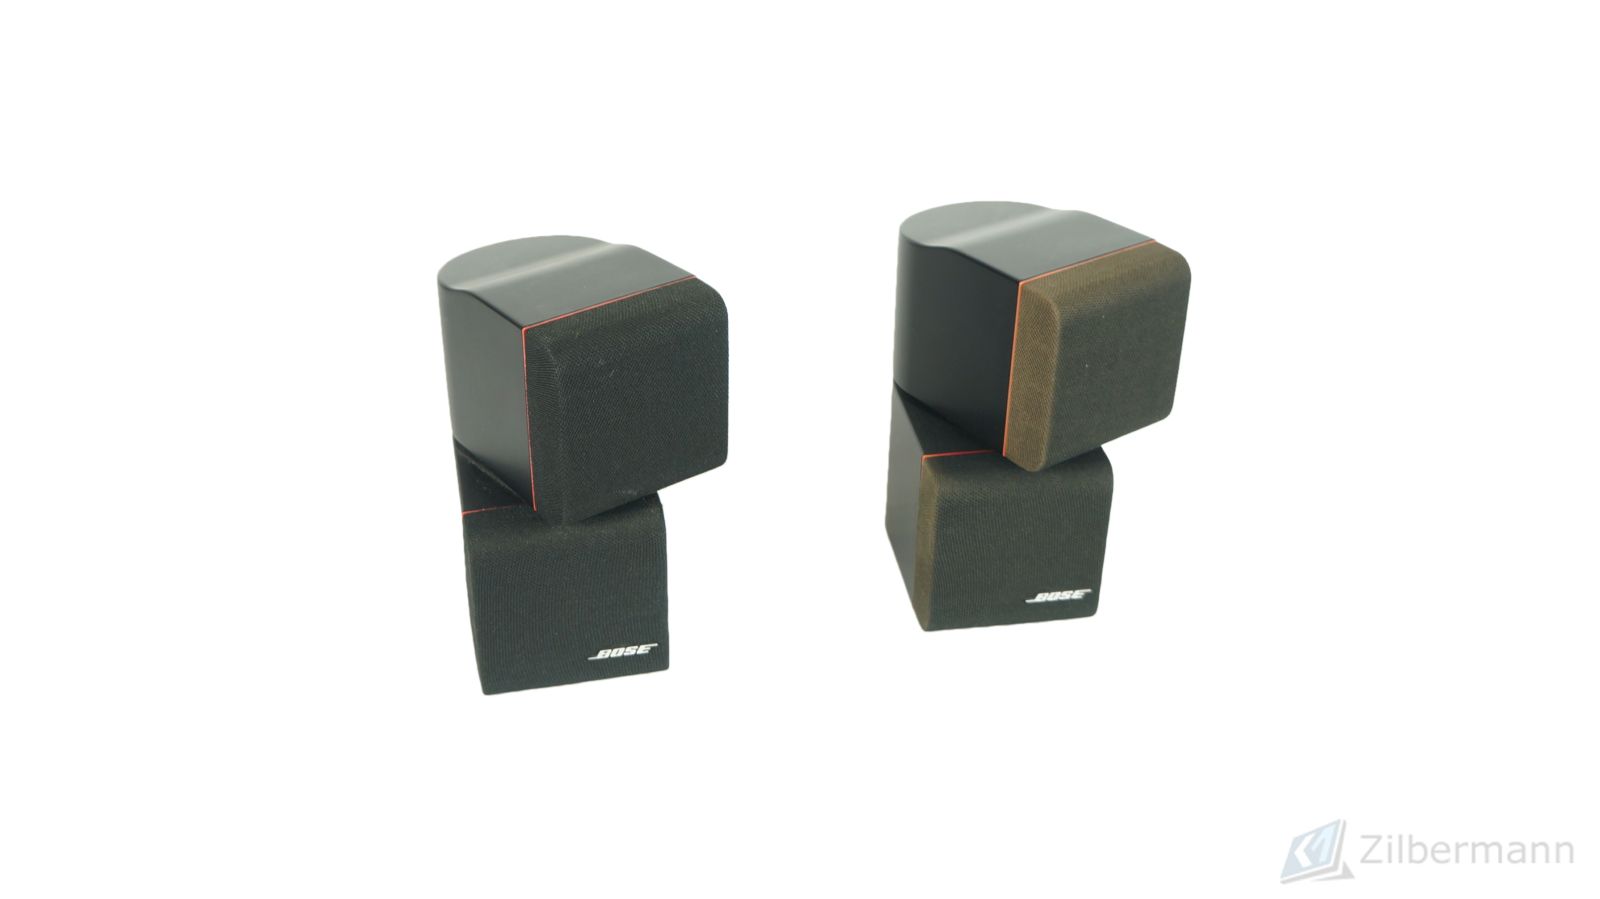 2x_Bose_Acoustimass_Doppelcubes_Series_II_mit_rotem_Rand_07